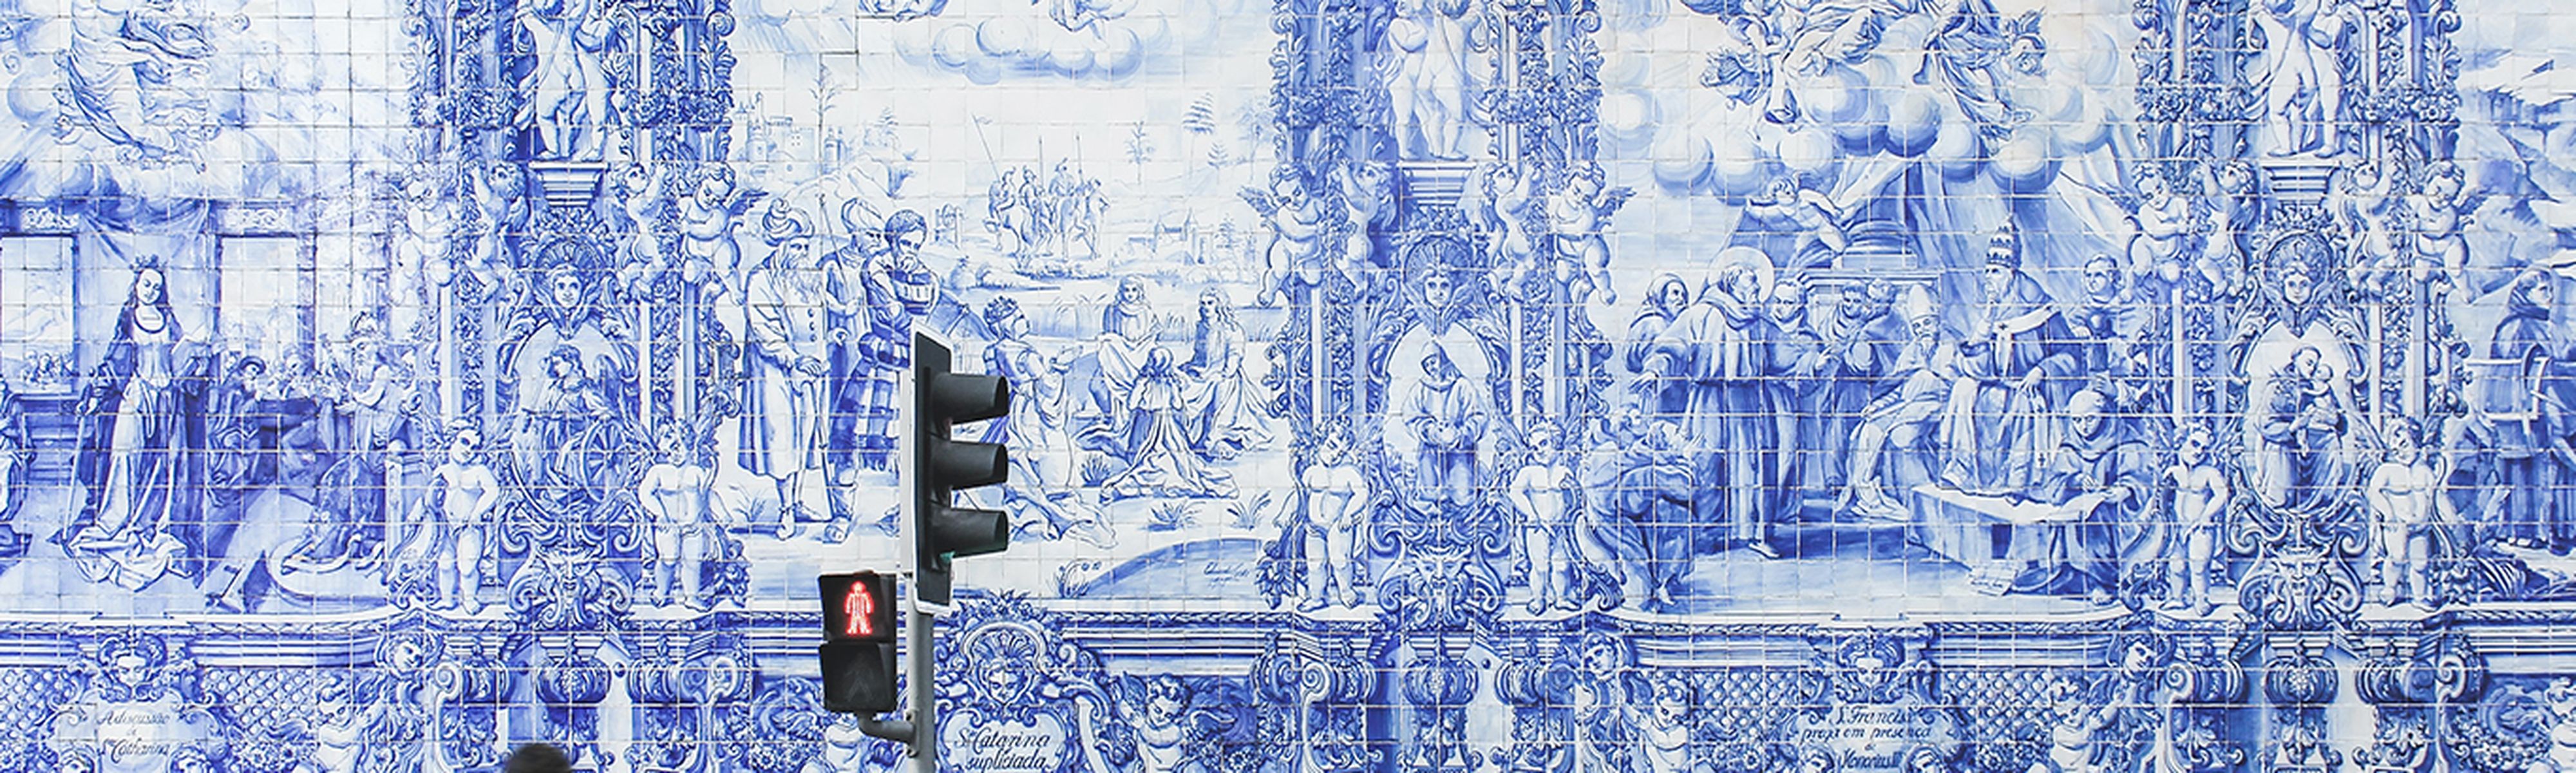 blue and white mosaics on a wall in porto portugal